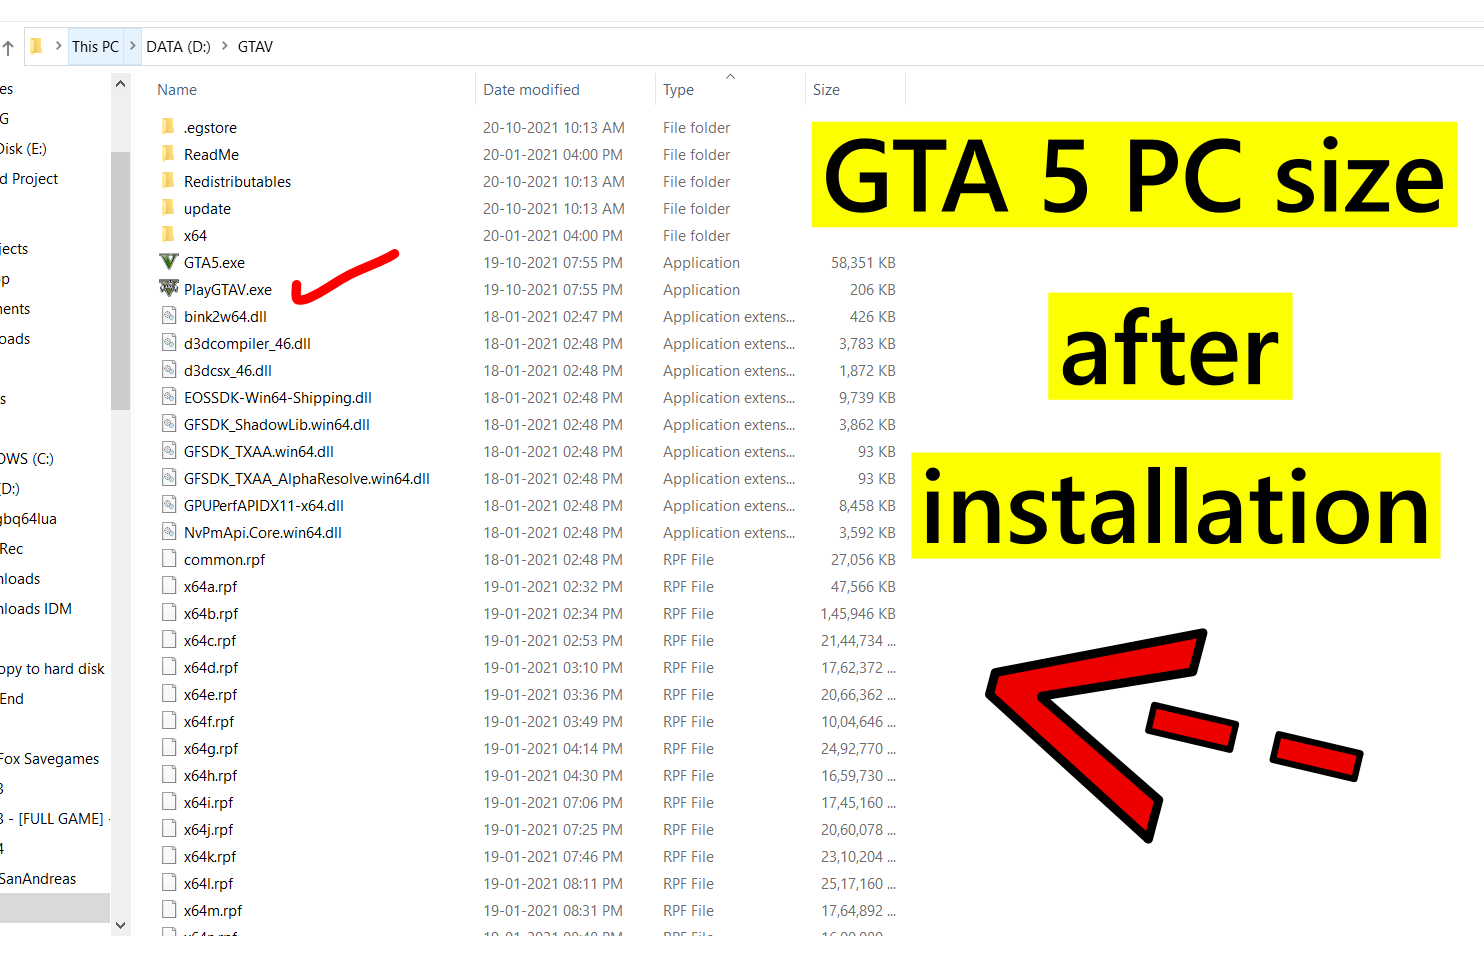 GTA 5 PC size after installation